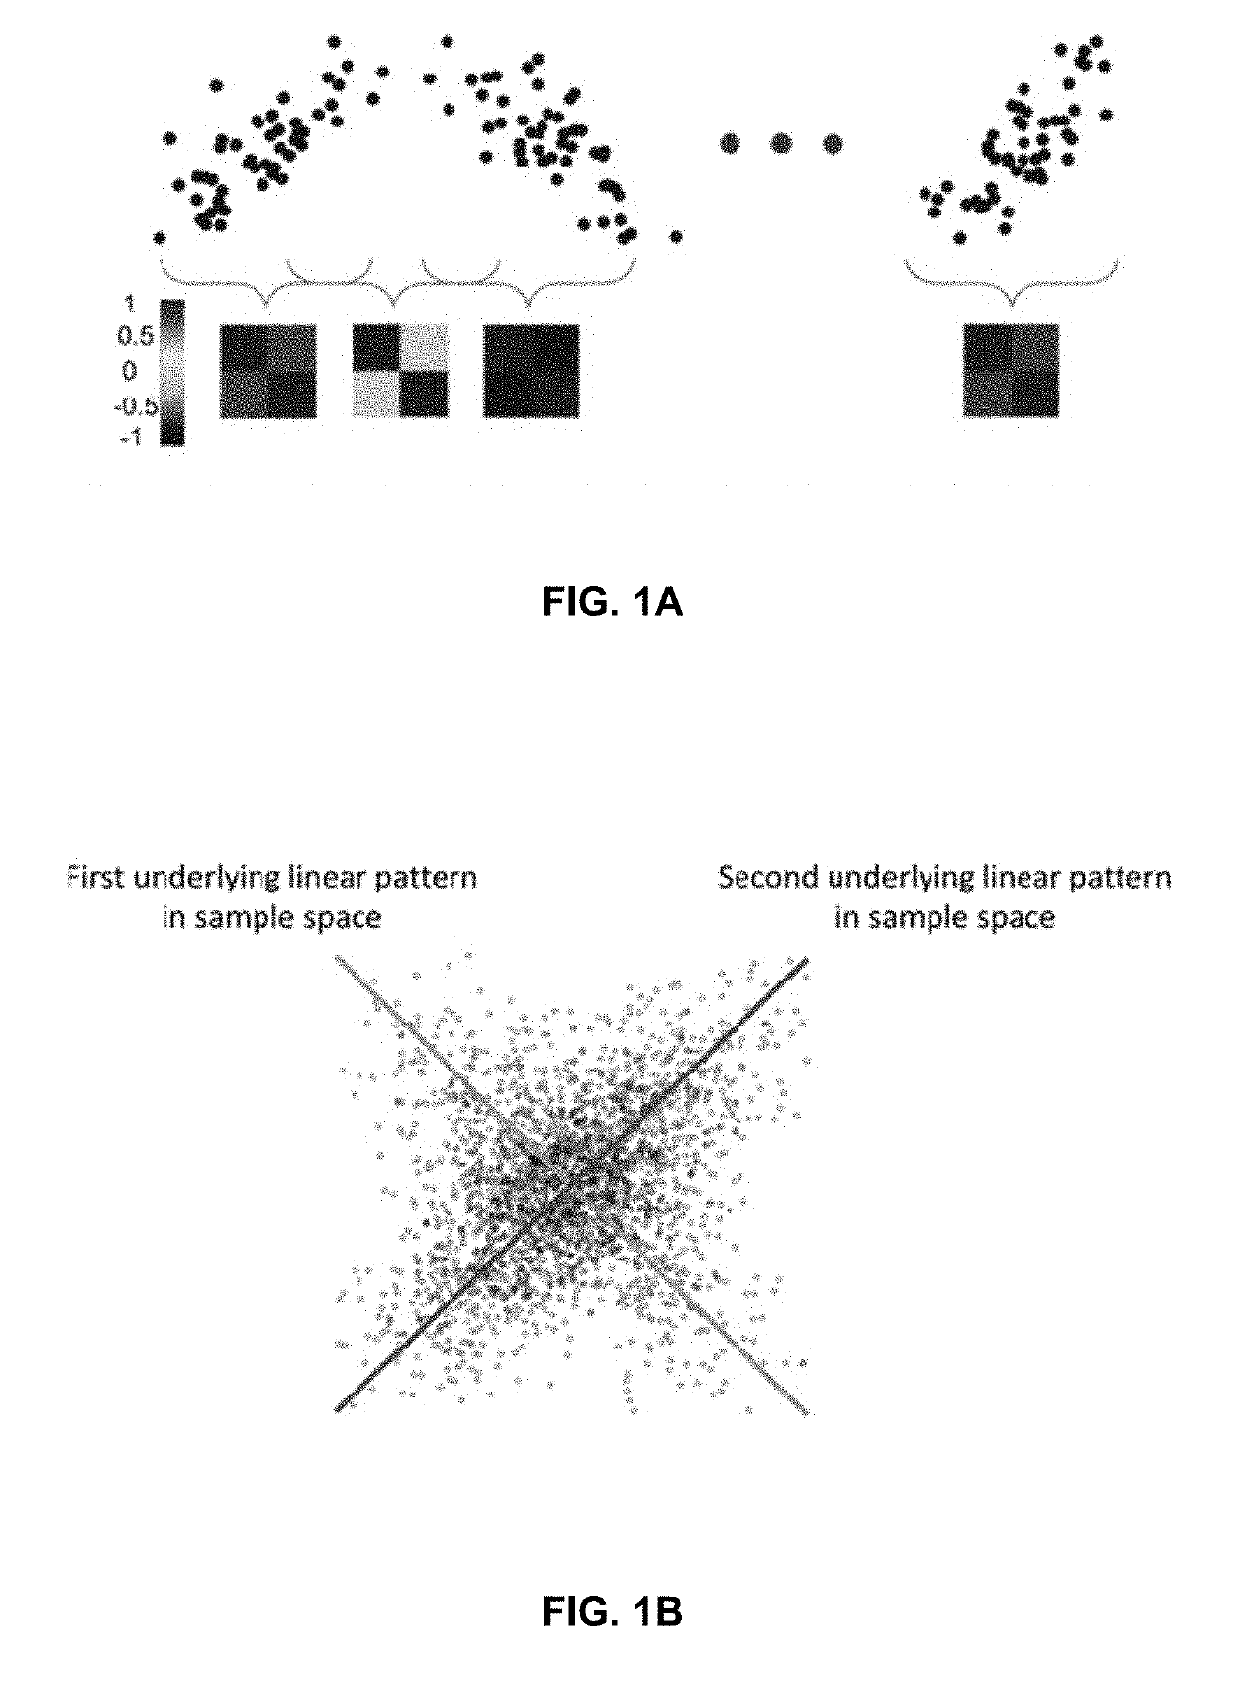 System and methods for dynamic covariance estimation of a multivariate signal